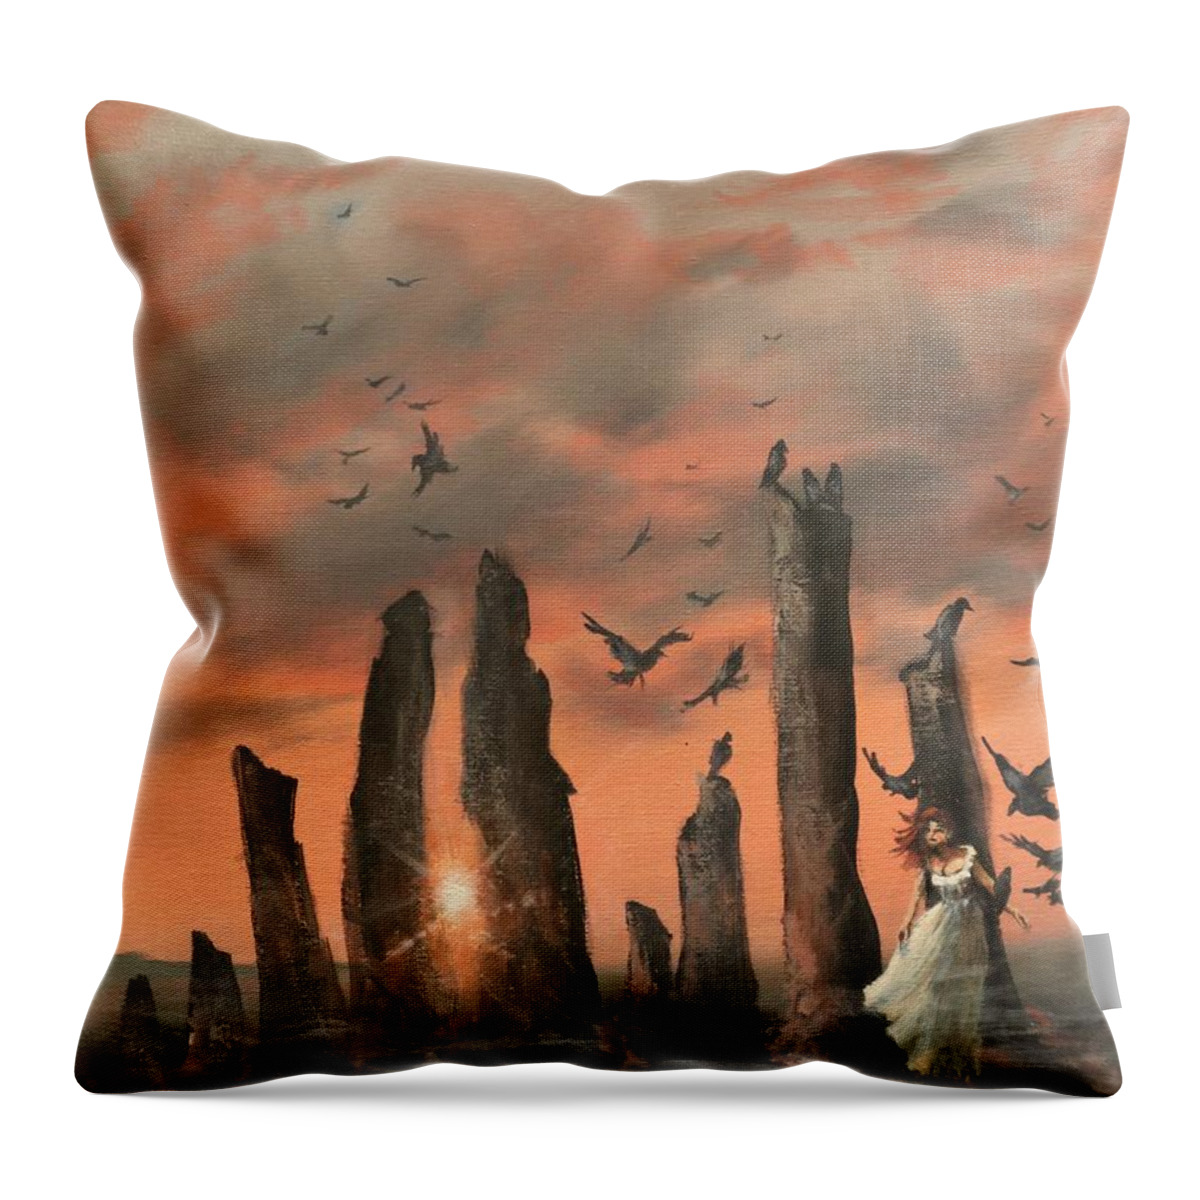 Callanish Stones Throw Pillow featuring the painting Secret of the Stones by Tom Shropshire